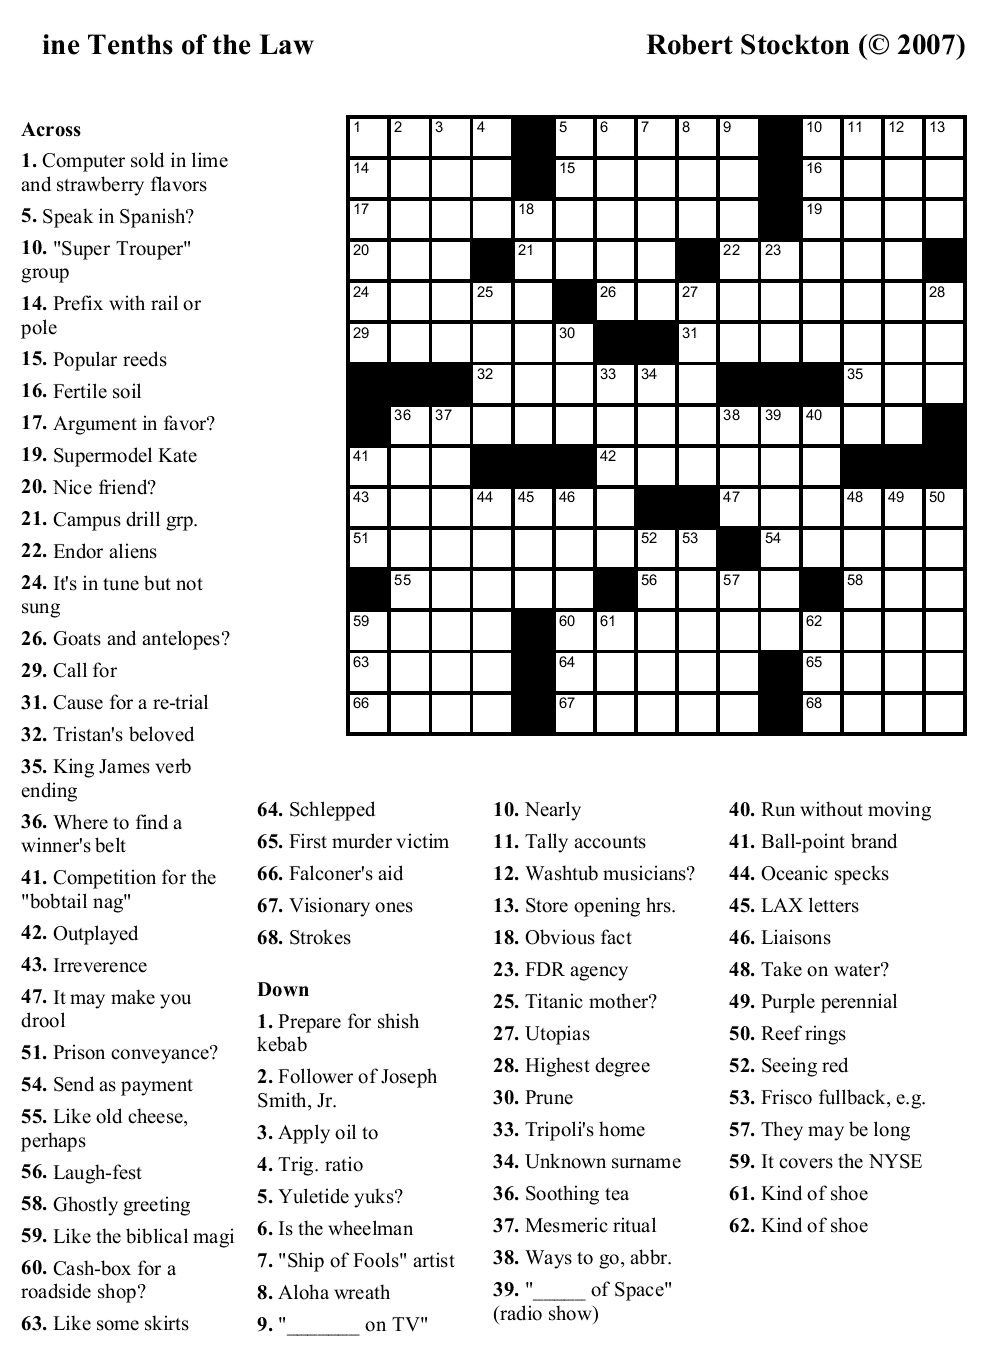 Crossword Puzzles Printable - Yahoo Image Search Results | Crossword - Printable Wordoku Puzzles